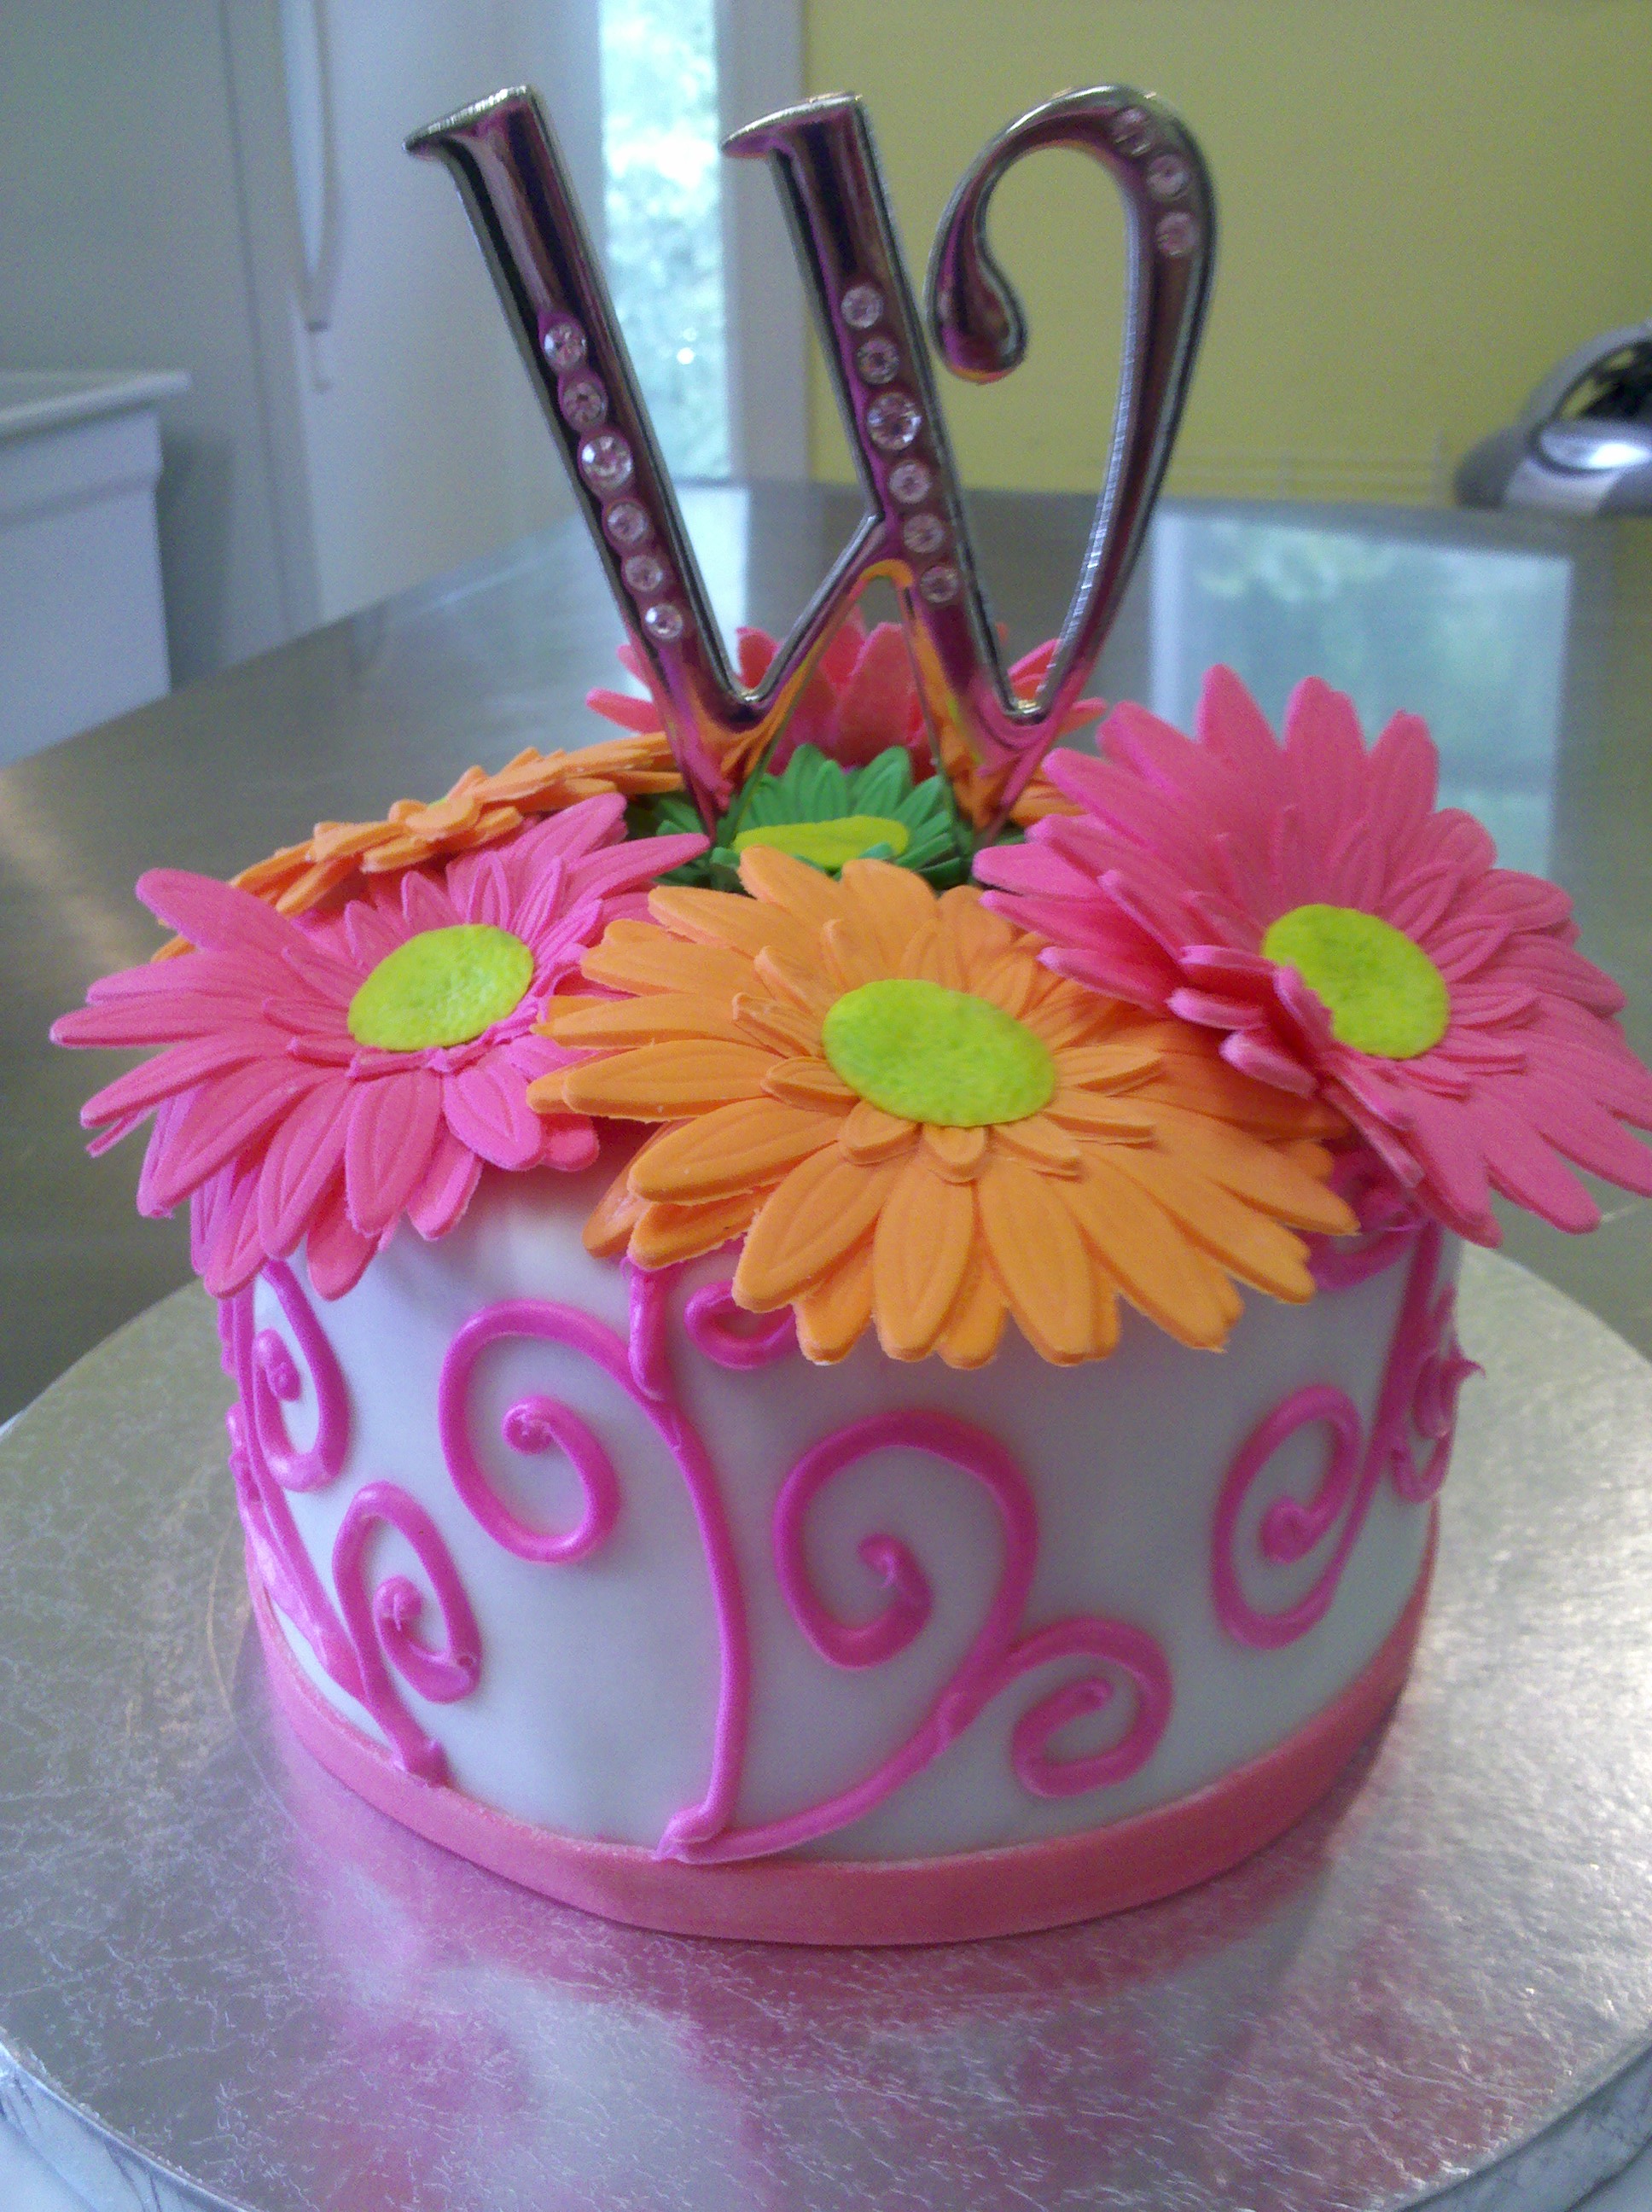 Cake with Gerber Daisies